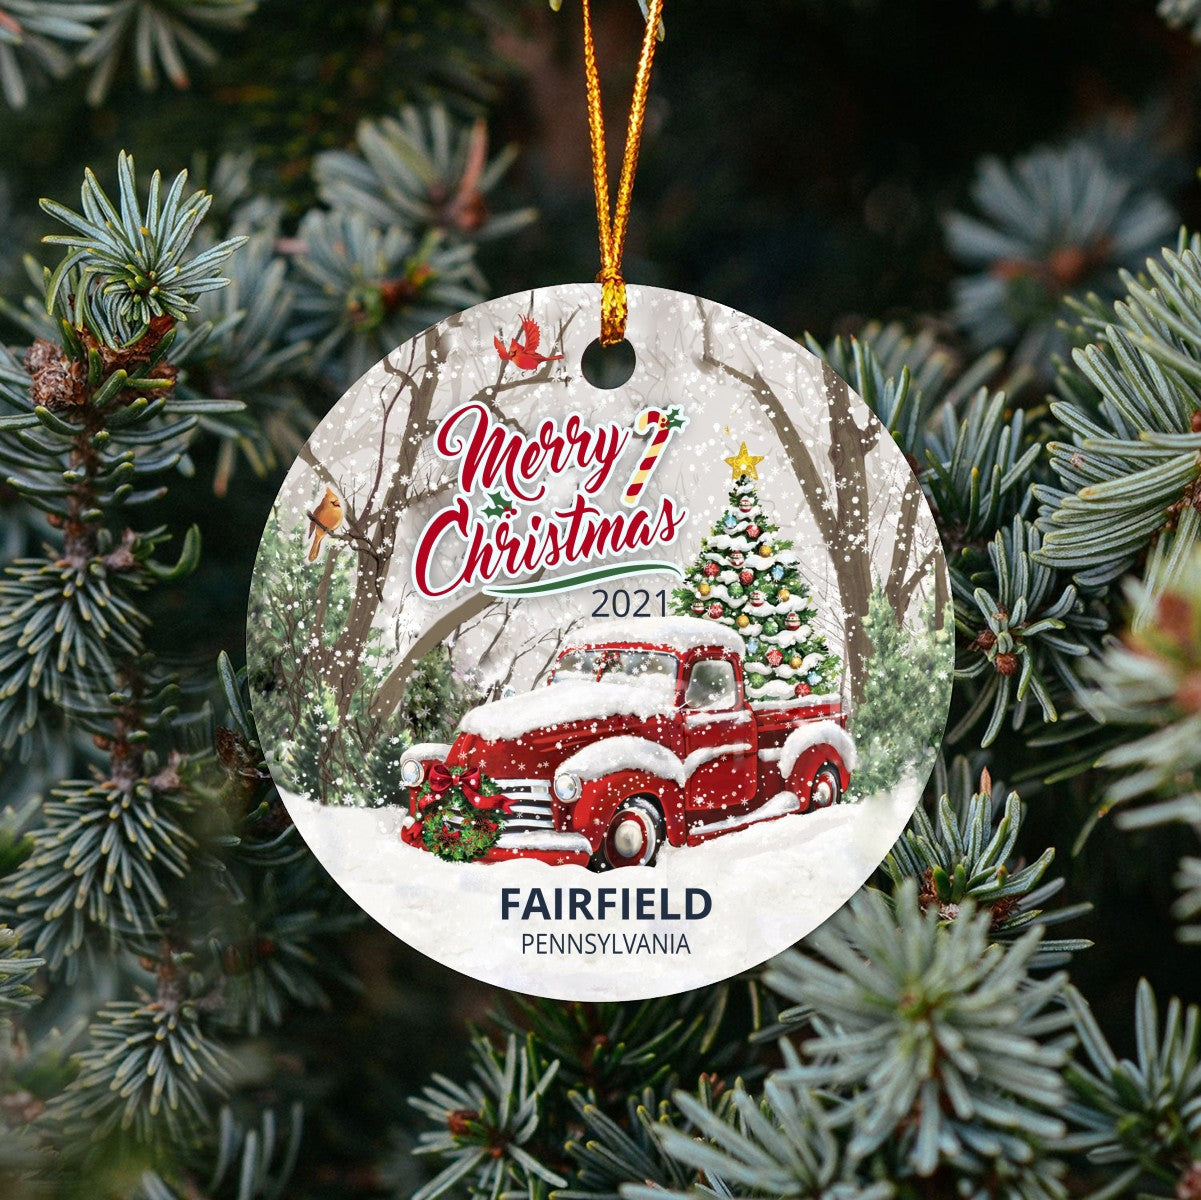 Christmas Tree Ornaments Fairfield - Ornament Customize With Name City And State Fairfield Pennsylvania PA - Red Truck Xmas Ornaments 3'' Plastic Gift For Family, Friend And Housewarming